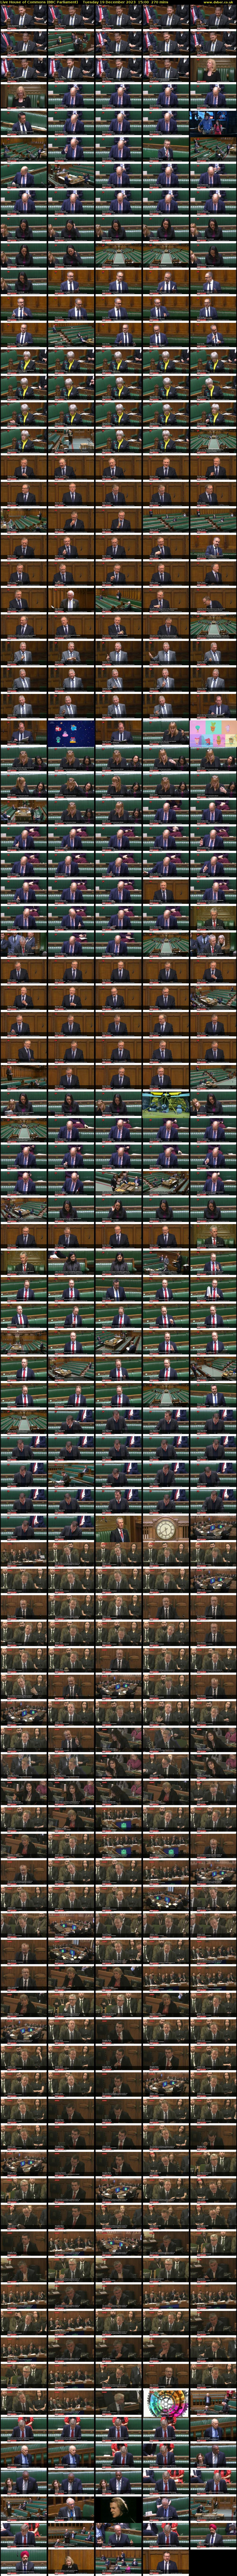 Live House of Commons (BBC Parliament) Tuesday 19 December 2023 15:00 - 19:30